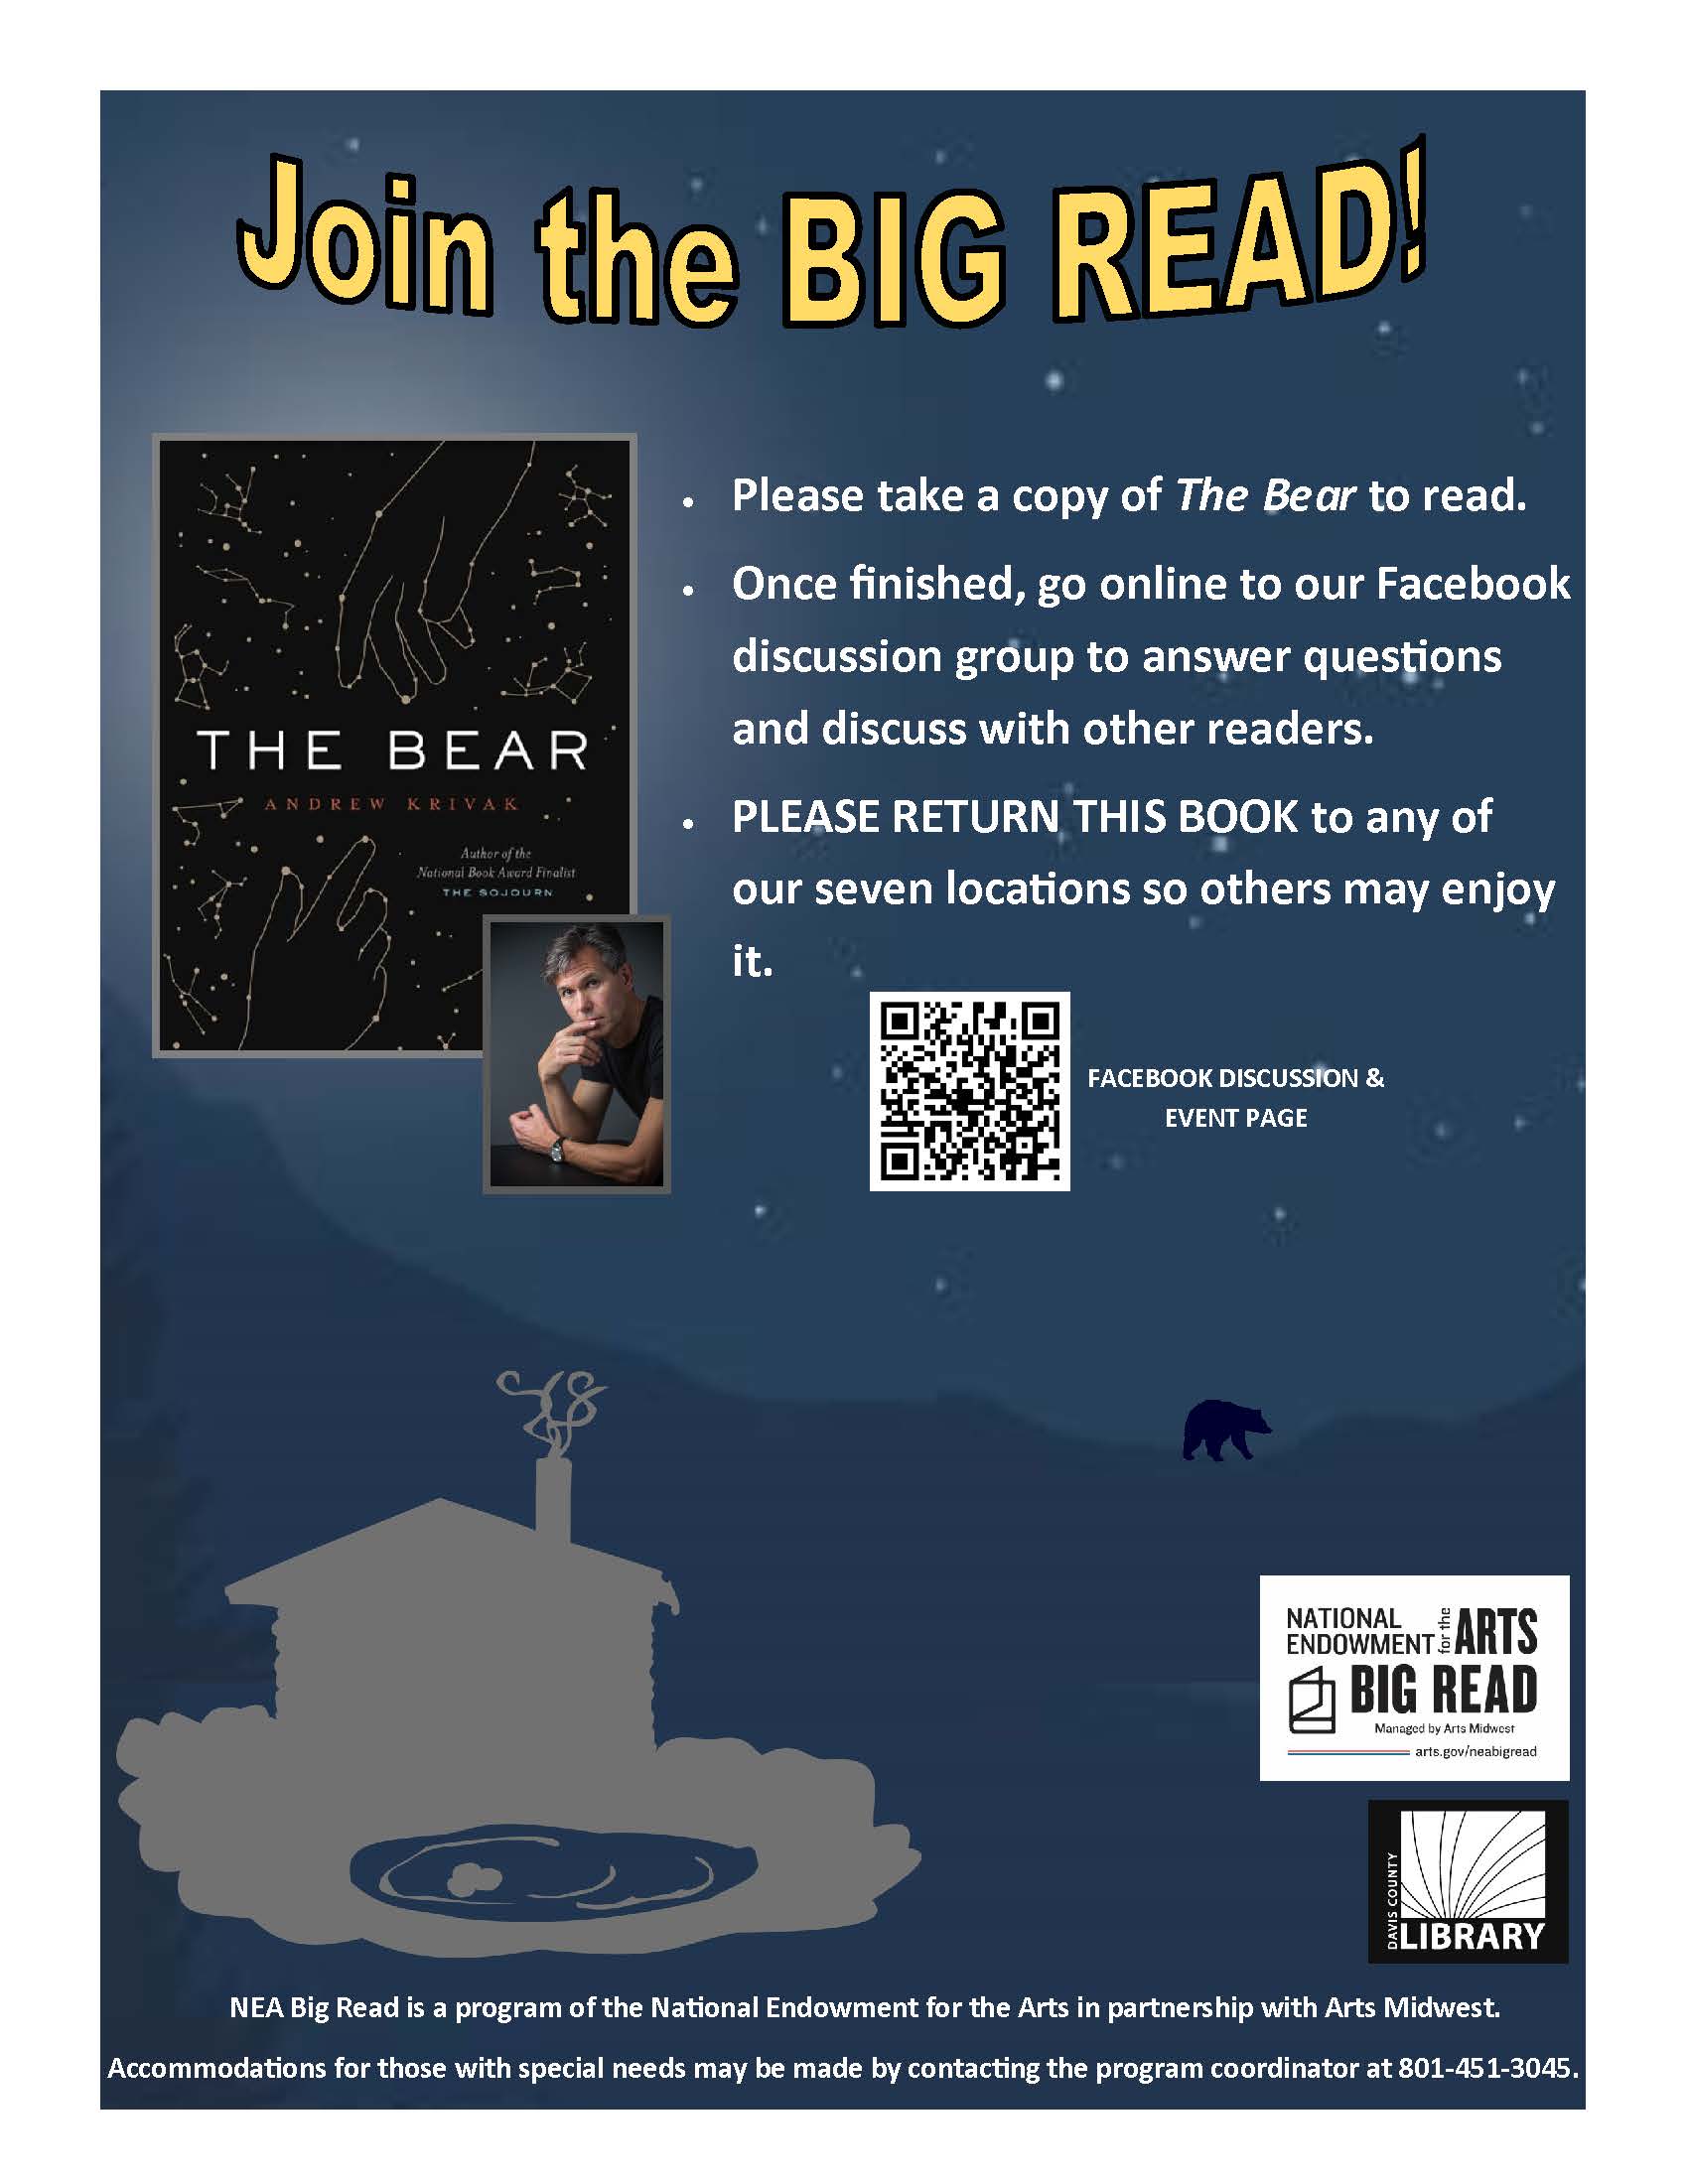 Join us at your favorite location beginning September 15 through June 2024 (except Sundays and observed holidays) and pick up a returnable copy of The Bear by Andrew Krivak.  We will read this book together as a library community. Once you've read the book, scan the QR code and join us for an online discussion on Facebook. Then, return the book to any library location so others can enjoy!